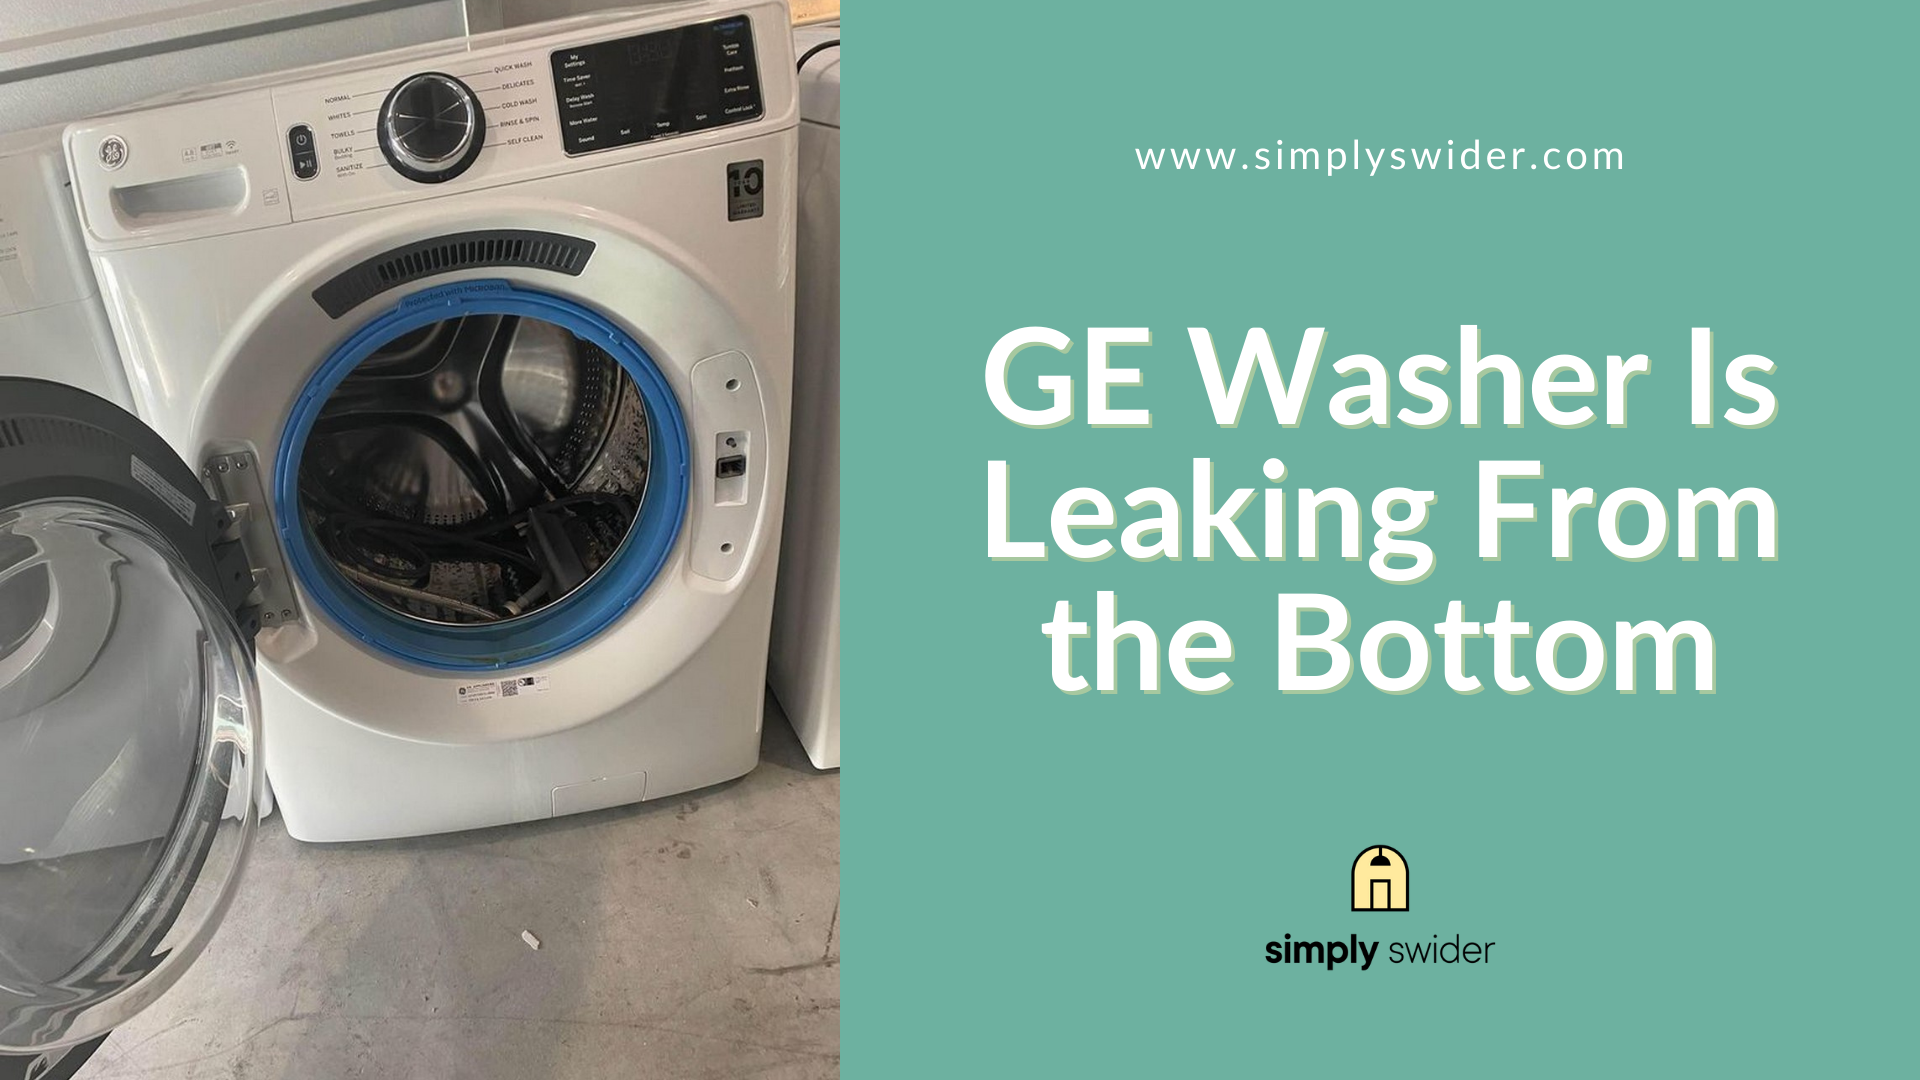 GE Washer Is Leaking From the Bottom